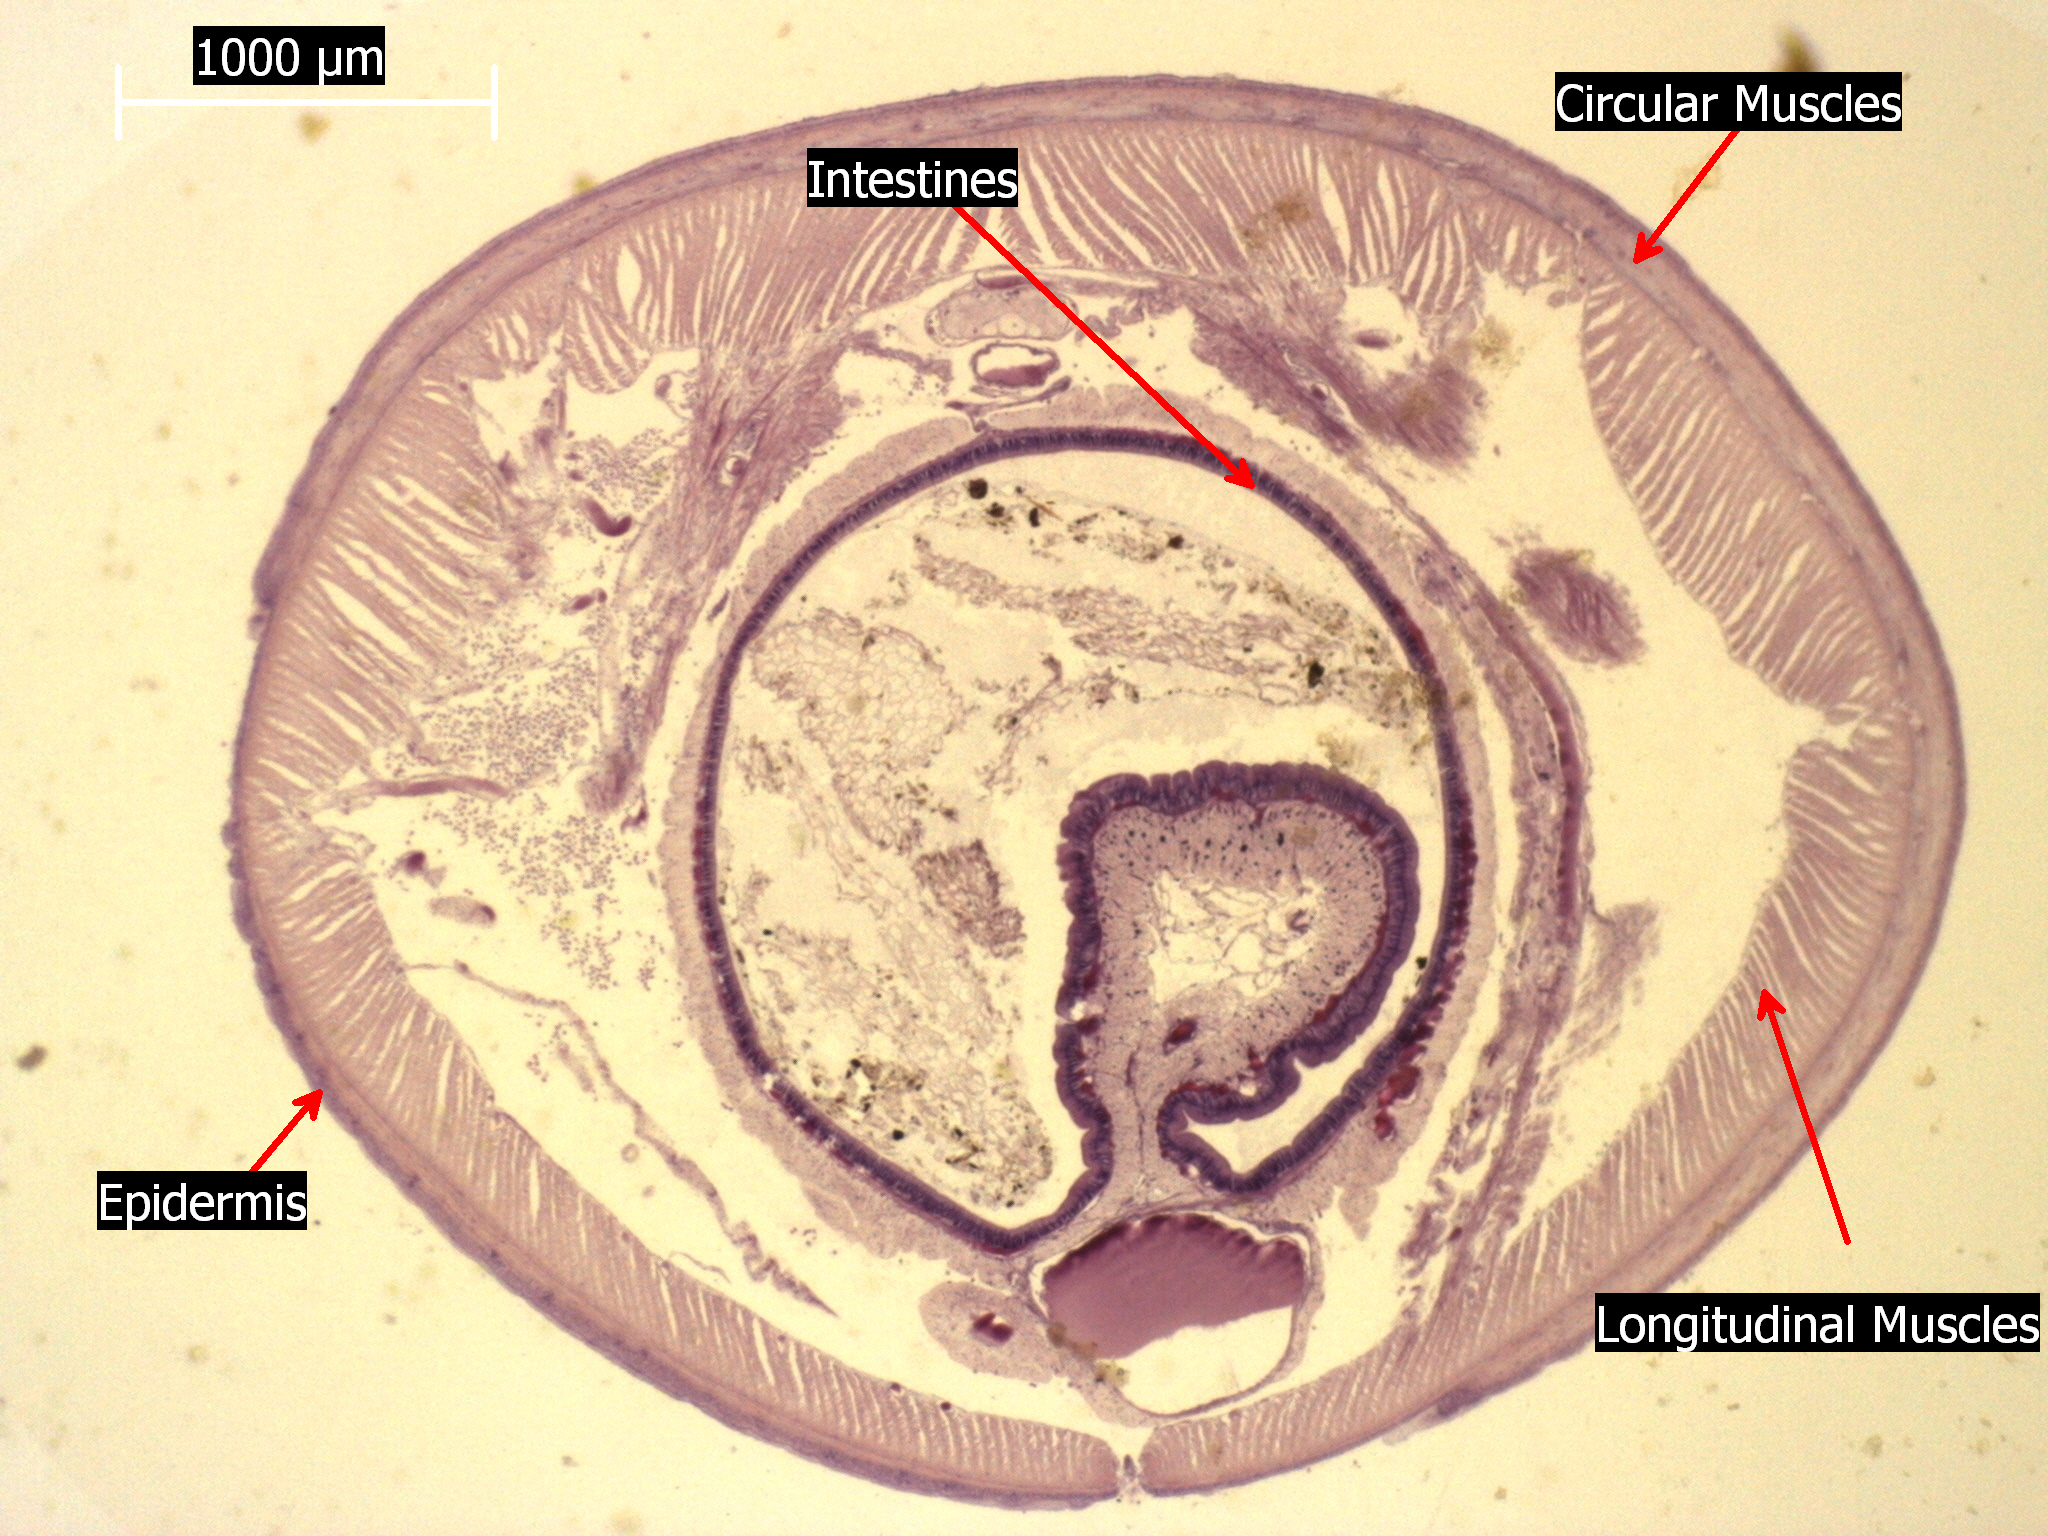 File:Earthworm Crosssection Stained Microscope Slide Labeled.jpg -  Wikimedia Commons